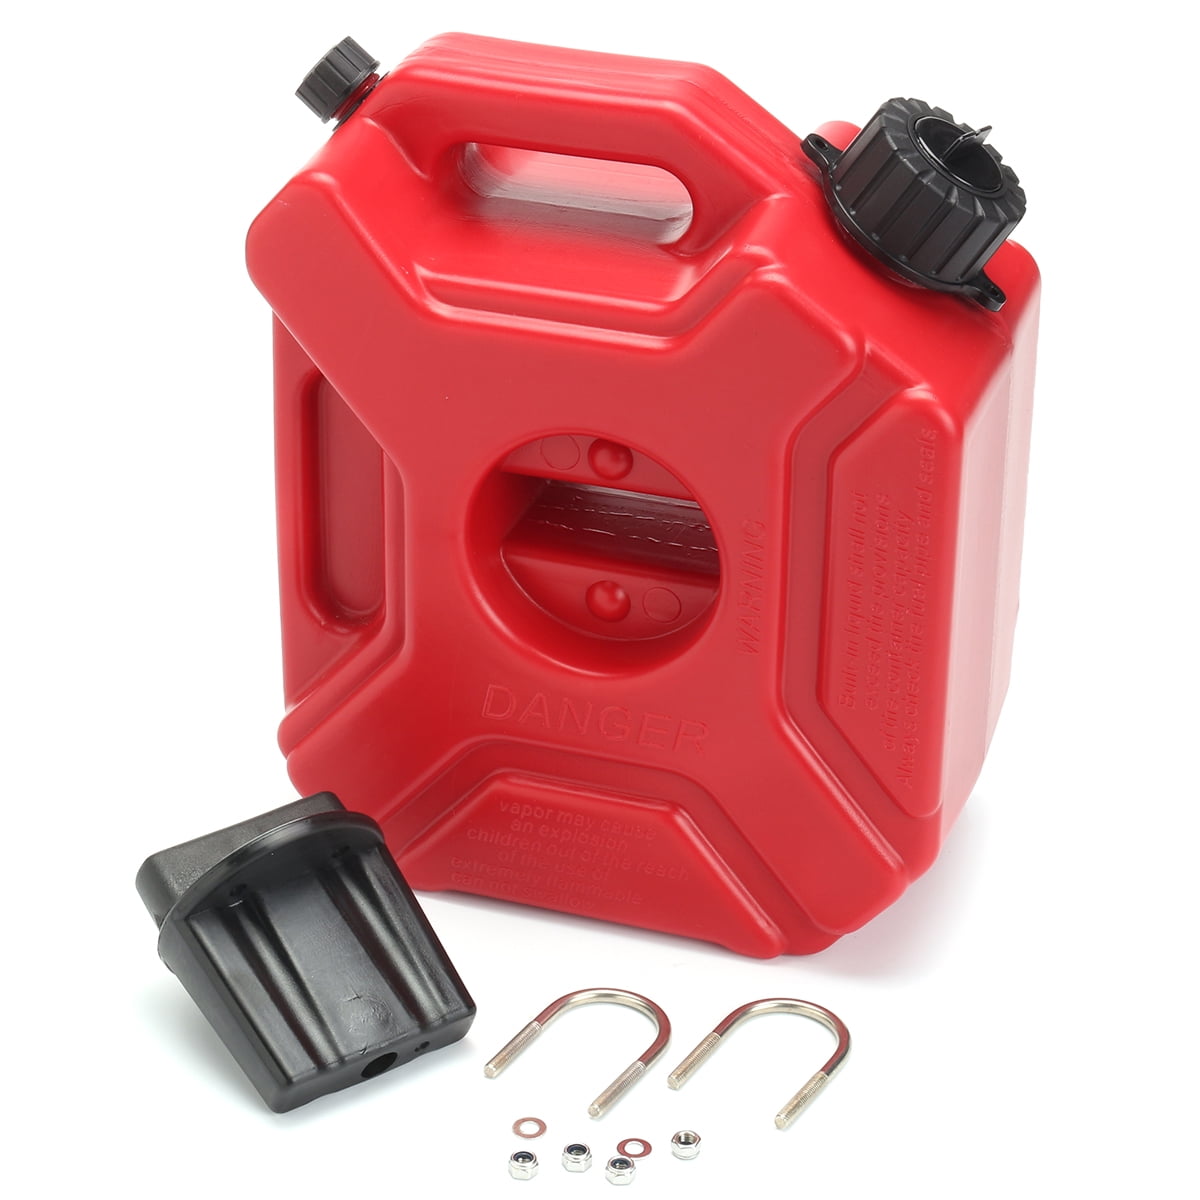 3L Plastic Jerry Cans Gas Container Diesel Fuel Tank Car Motorcycle w/Lock Dossy 